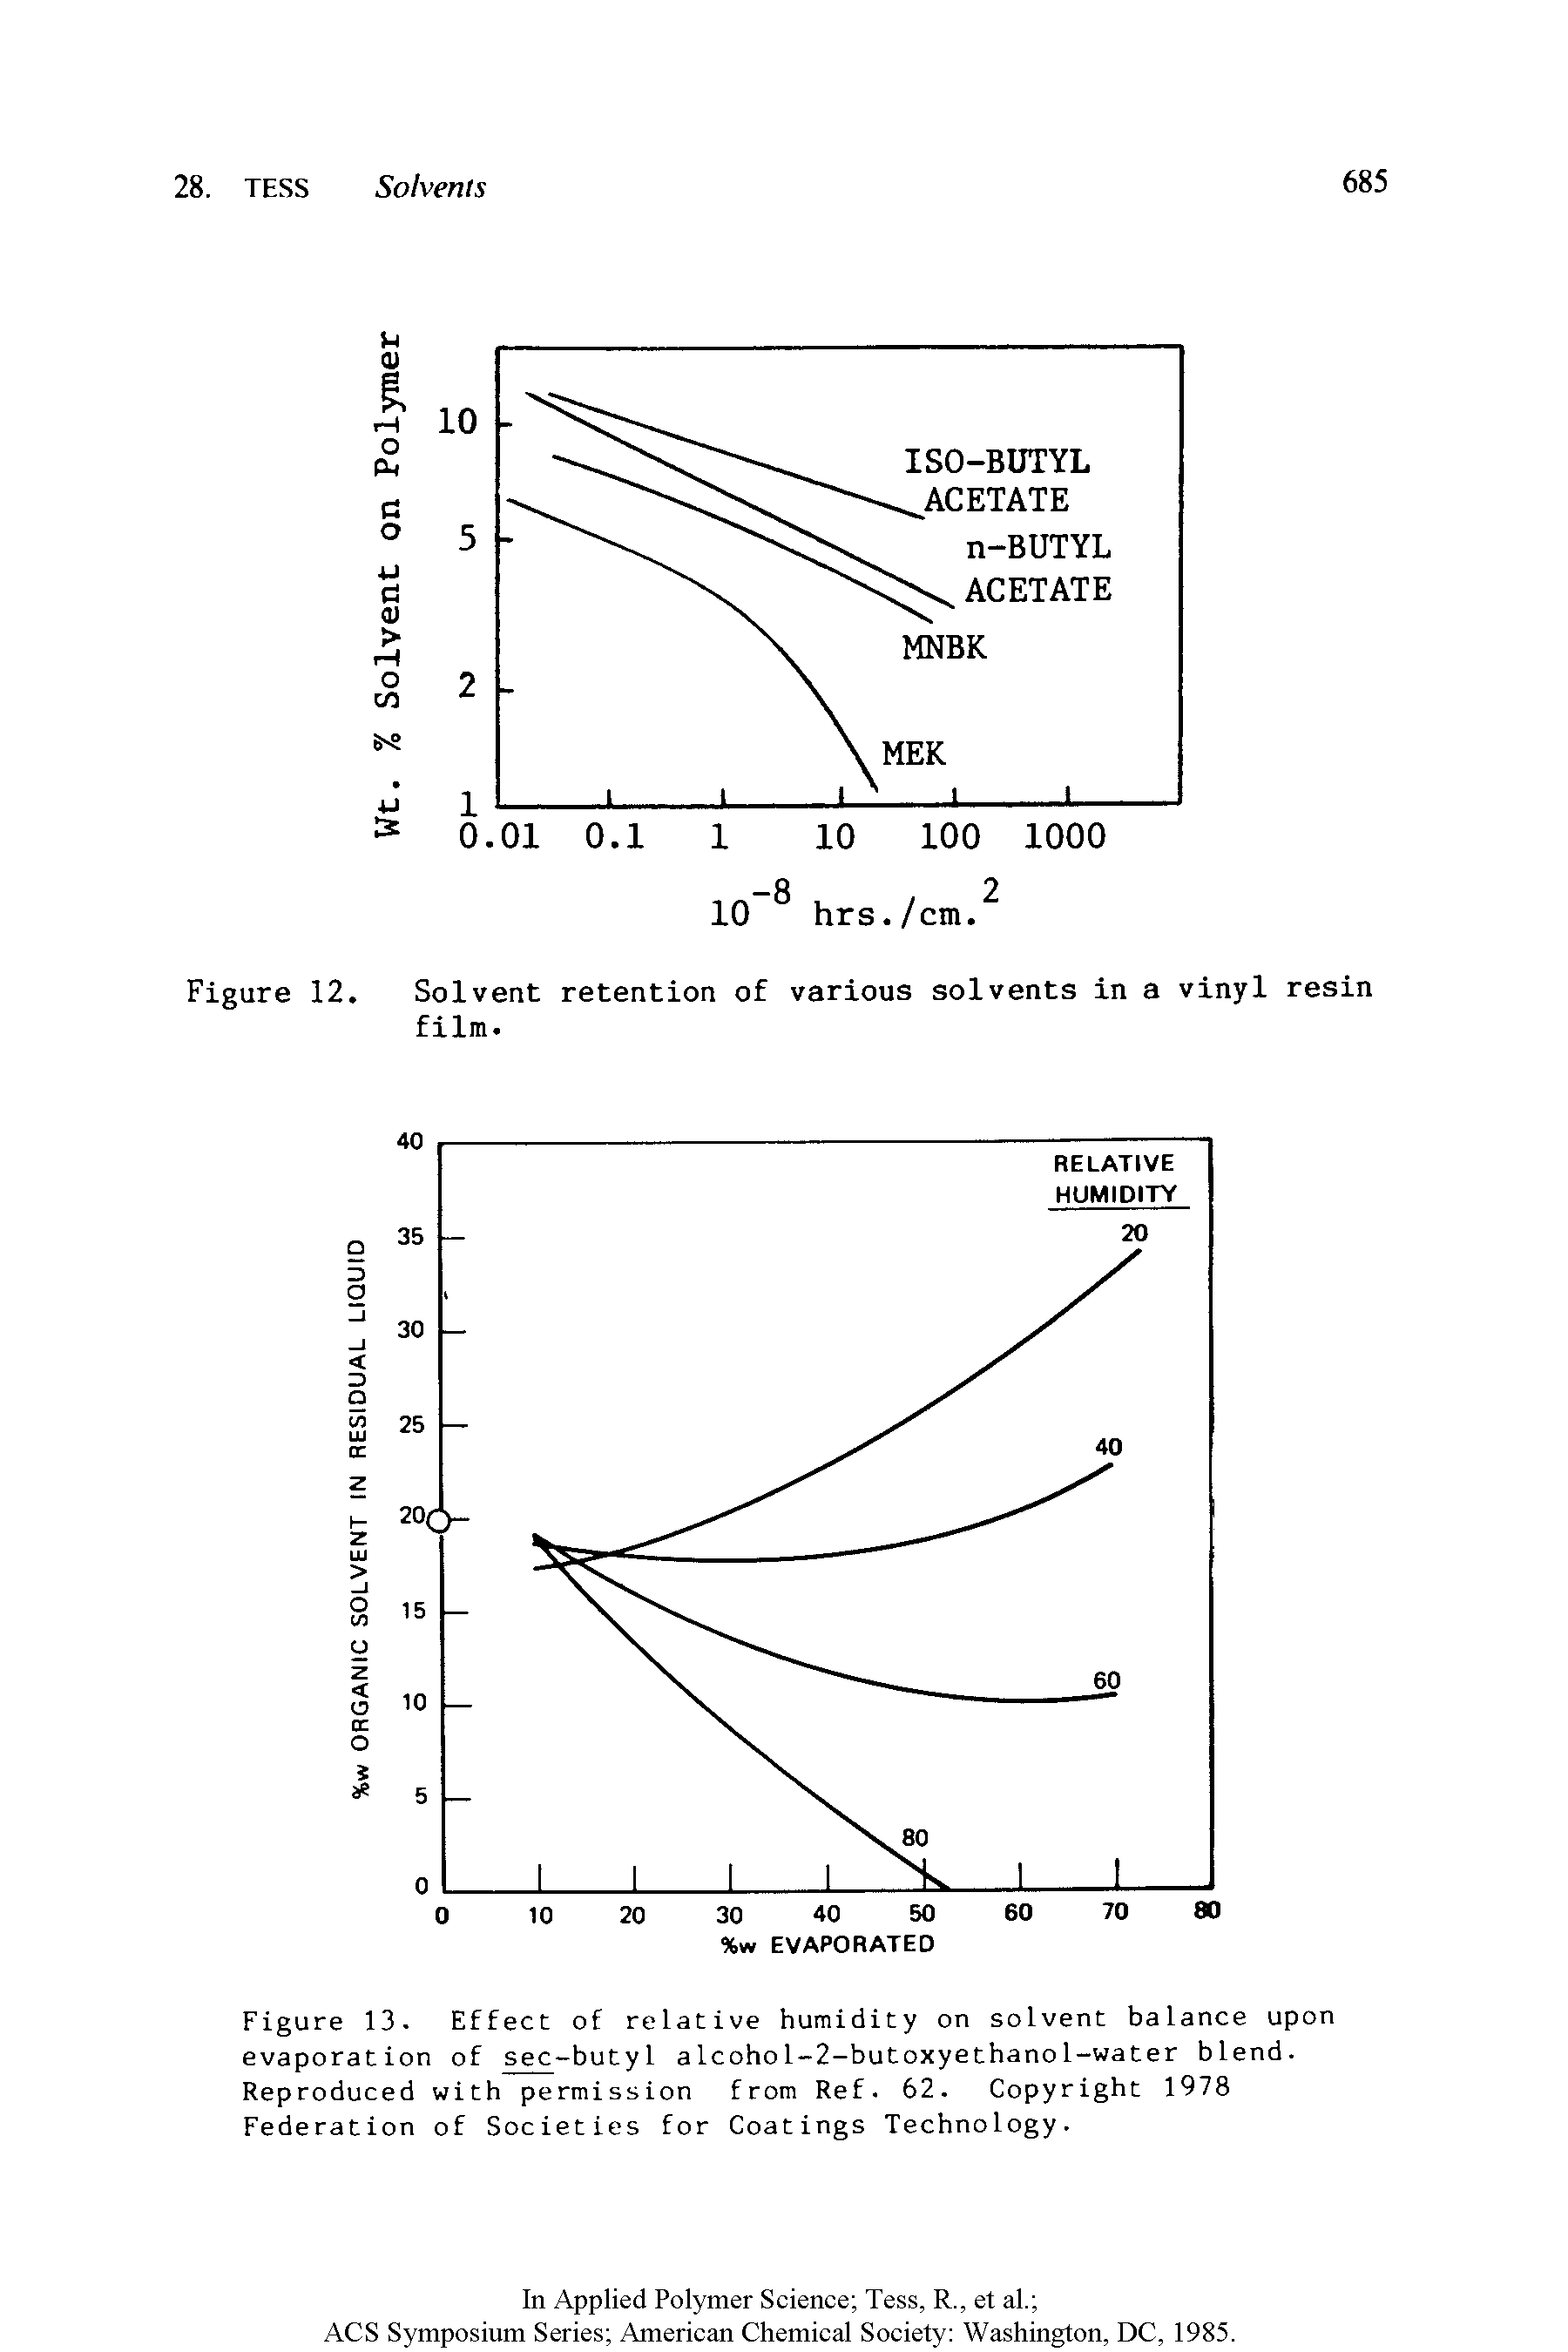 Figure 13. Effect of relative humidity on solvent balance upon evaporation of sec-butyl aIcoho1-2-butoxyethano1-water blend. Reproduced with permission from Ref. 62. Copyright 1978 Federation of Societies for Coatings Technology.